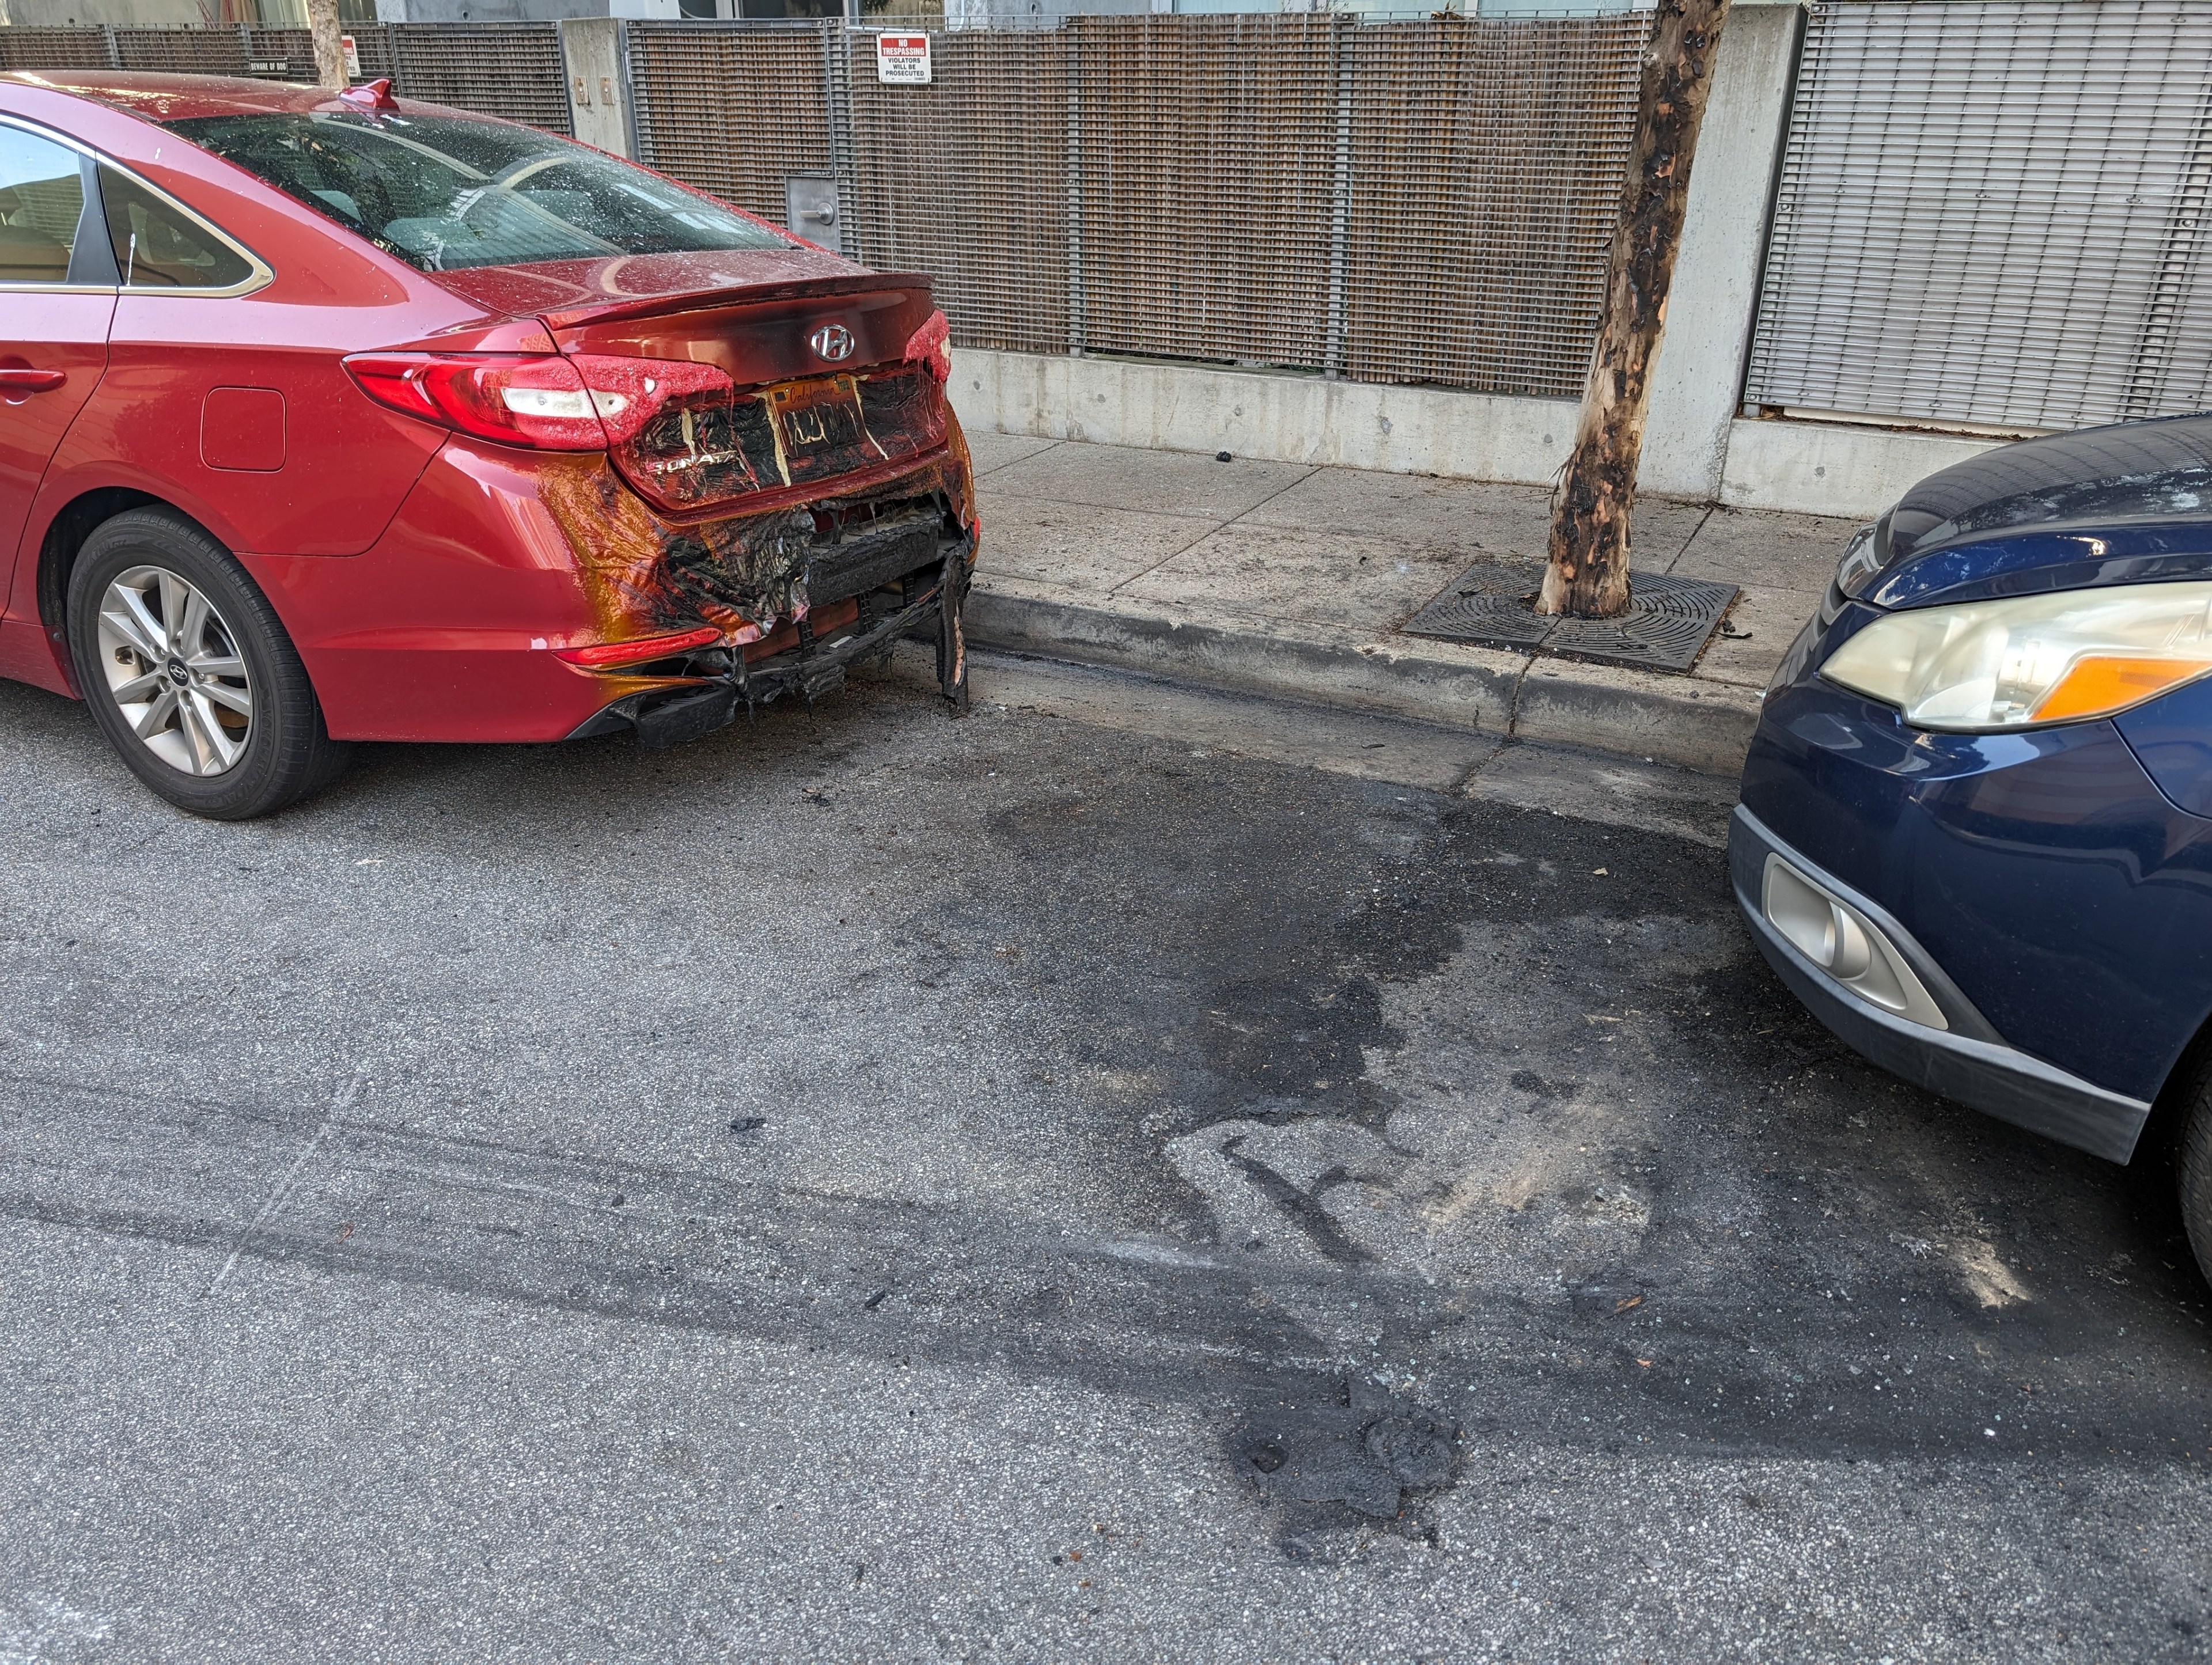 A parked vehicle's rear bumper is blackened by a vehicle fire a day earlier